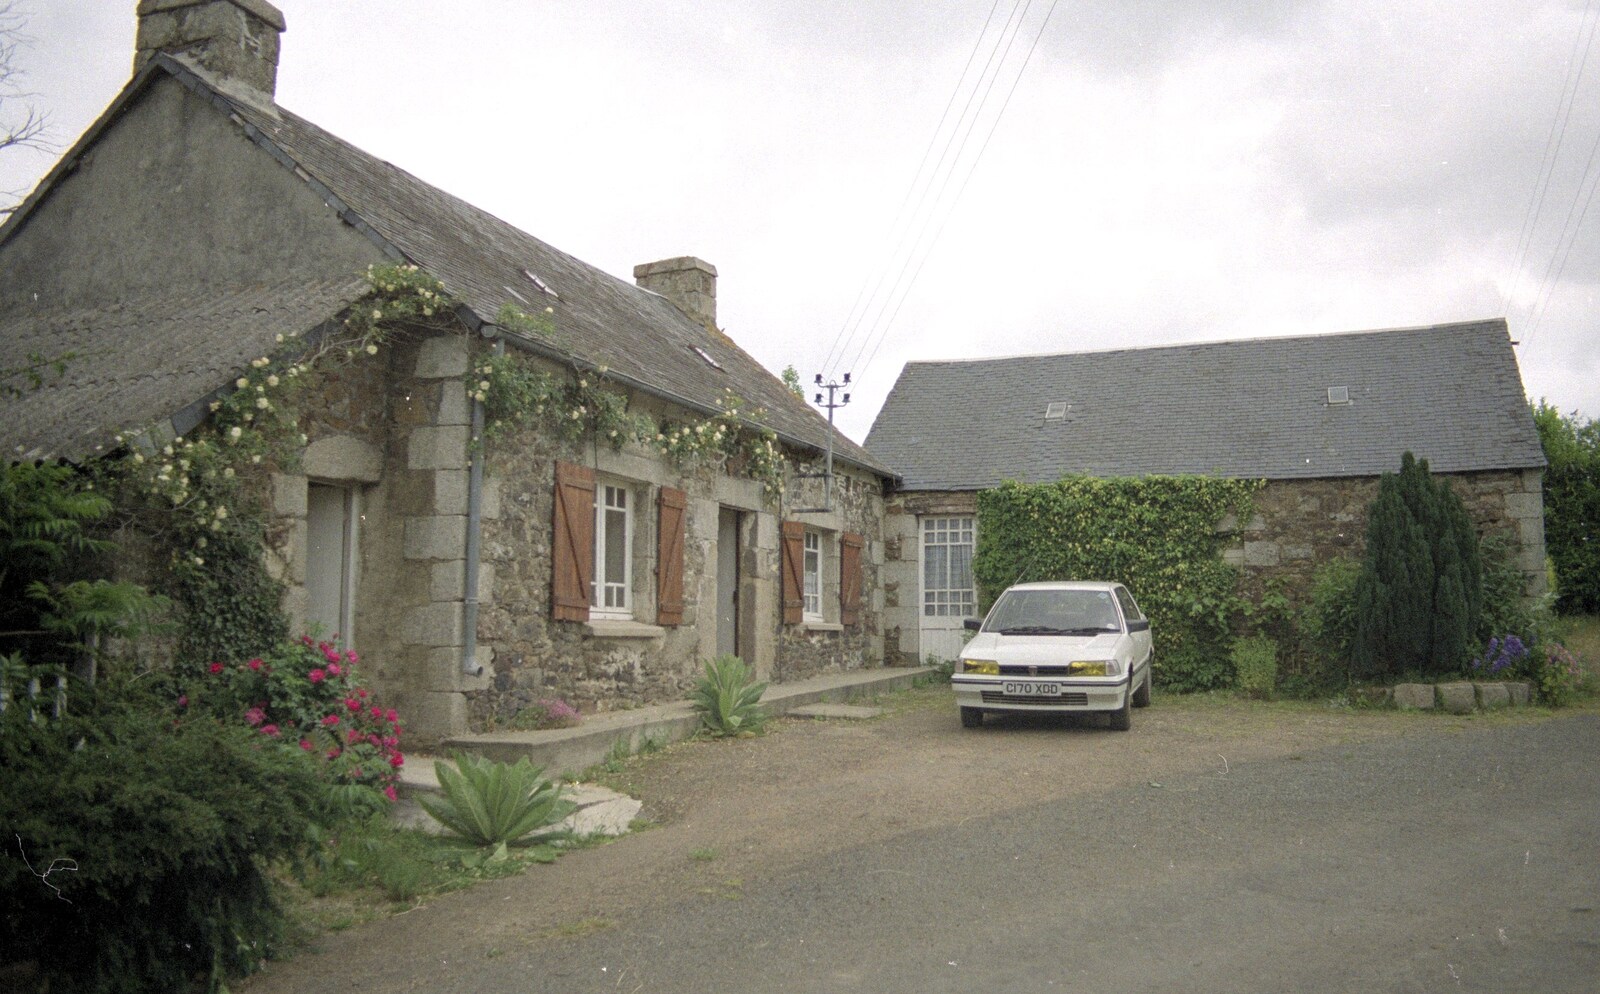 Angela's car, with yellow stickers on the headlights from A Trip To Huelgoat, Brittany, France - 11th June 1990